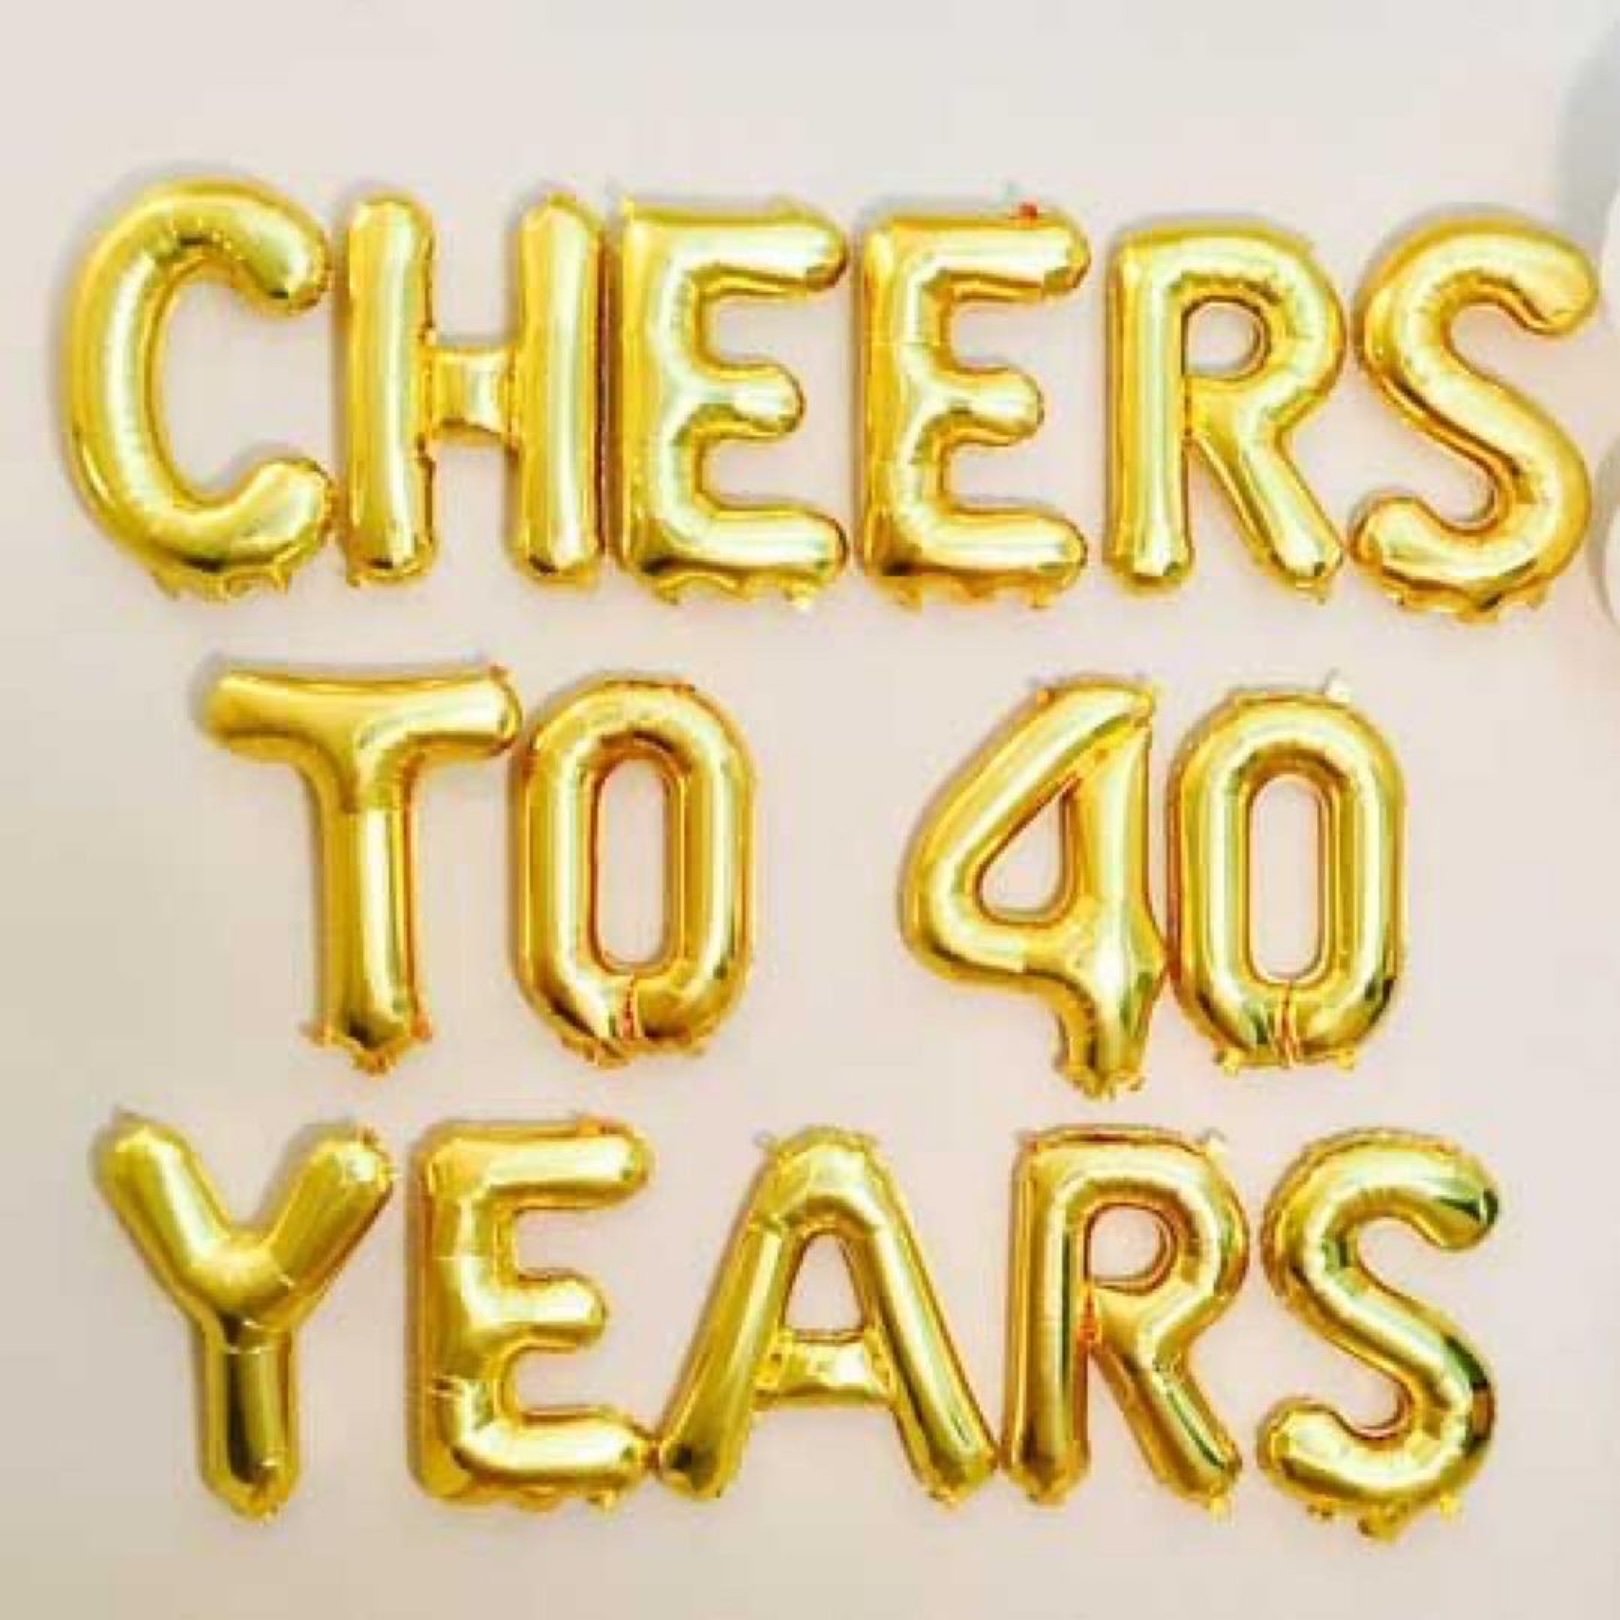 Cheers to 40 Years!